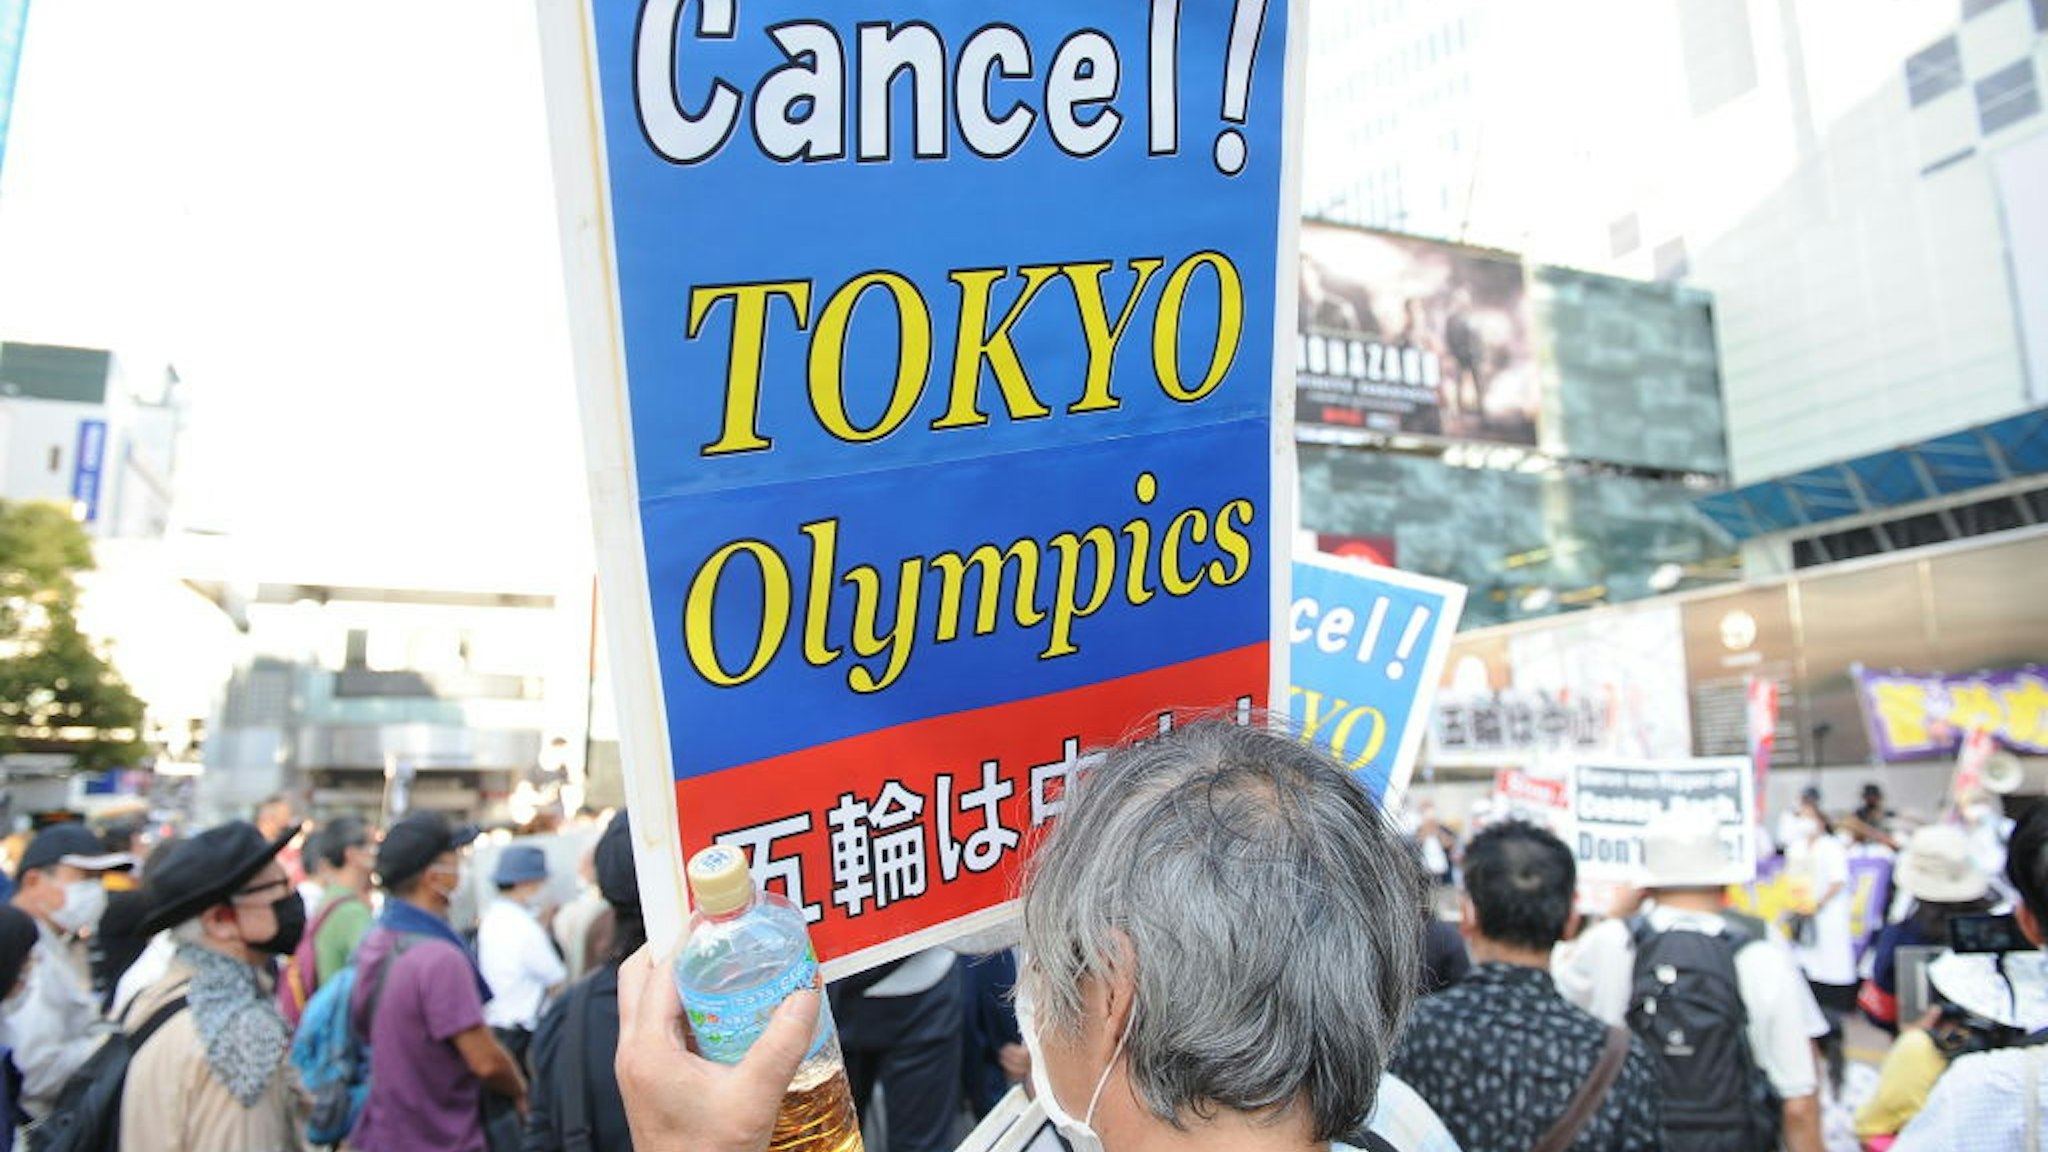 TOKYO, JAPAN - JULY 23 : People protest against the Opening ceremony of 2020 Tokyo Summer Olympic Games on July 23, 2020 in Tokyo, Japan, as they ask for the cancel of the Games a few hours ahead of the Opening ceremony of the Tokyo Games. (Photo by David Mareuil/Anadolu Agency via Getty Images)